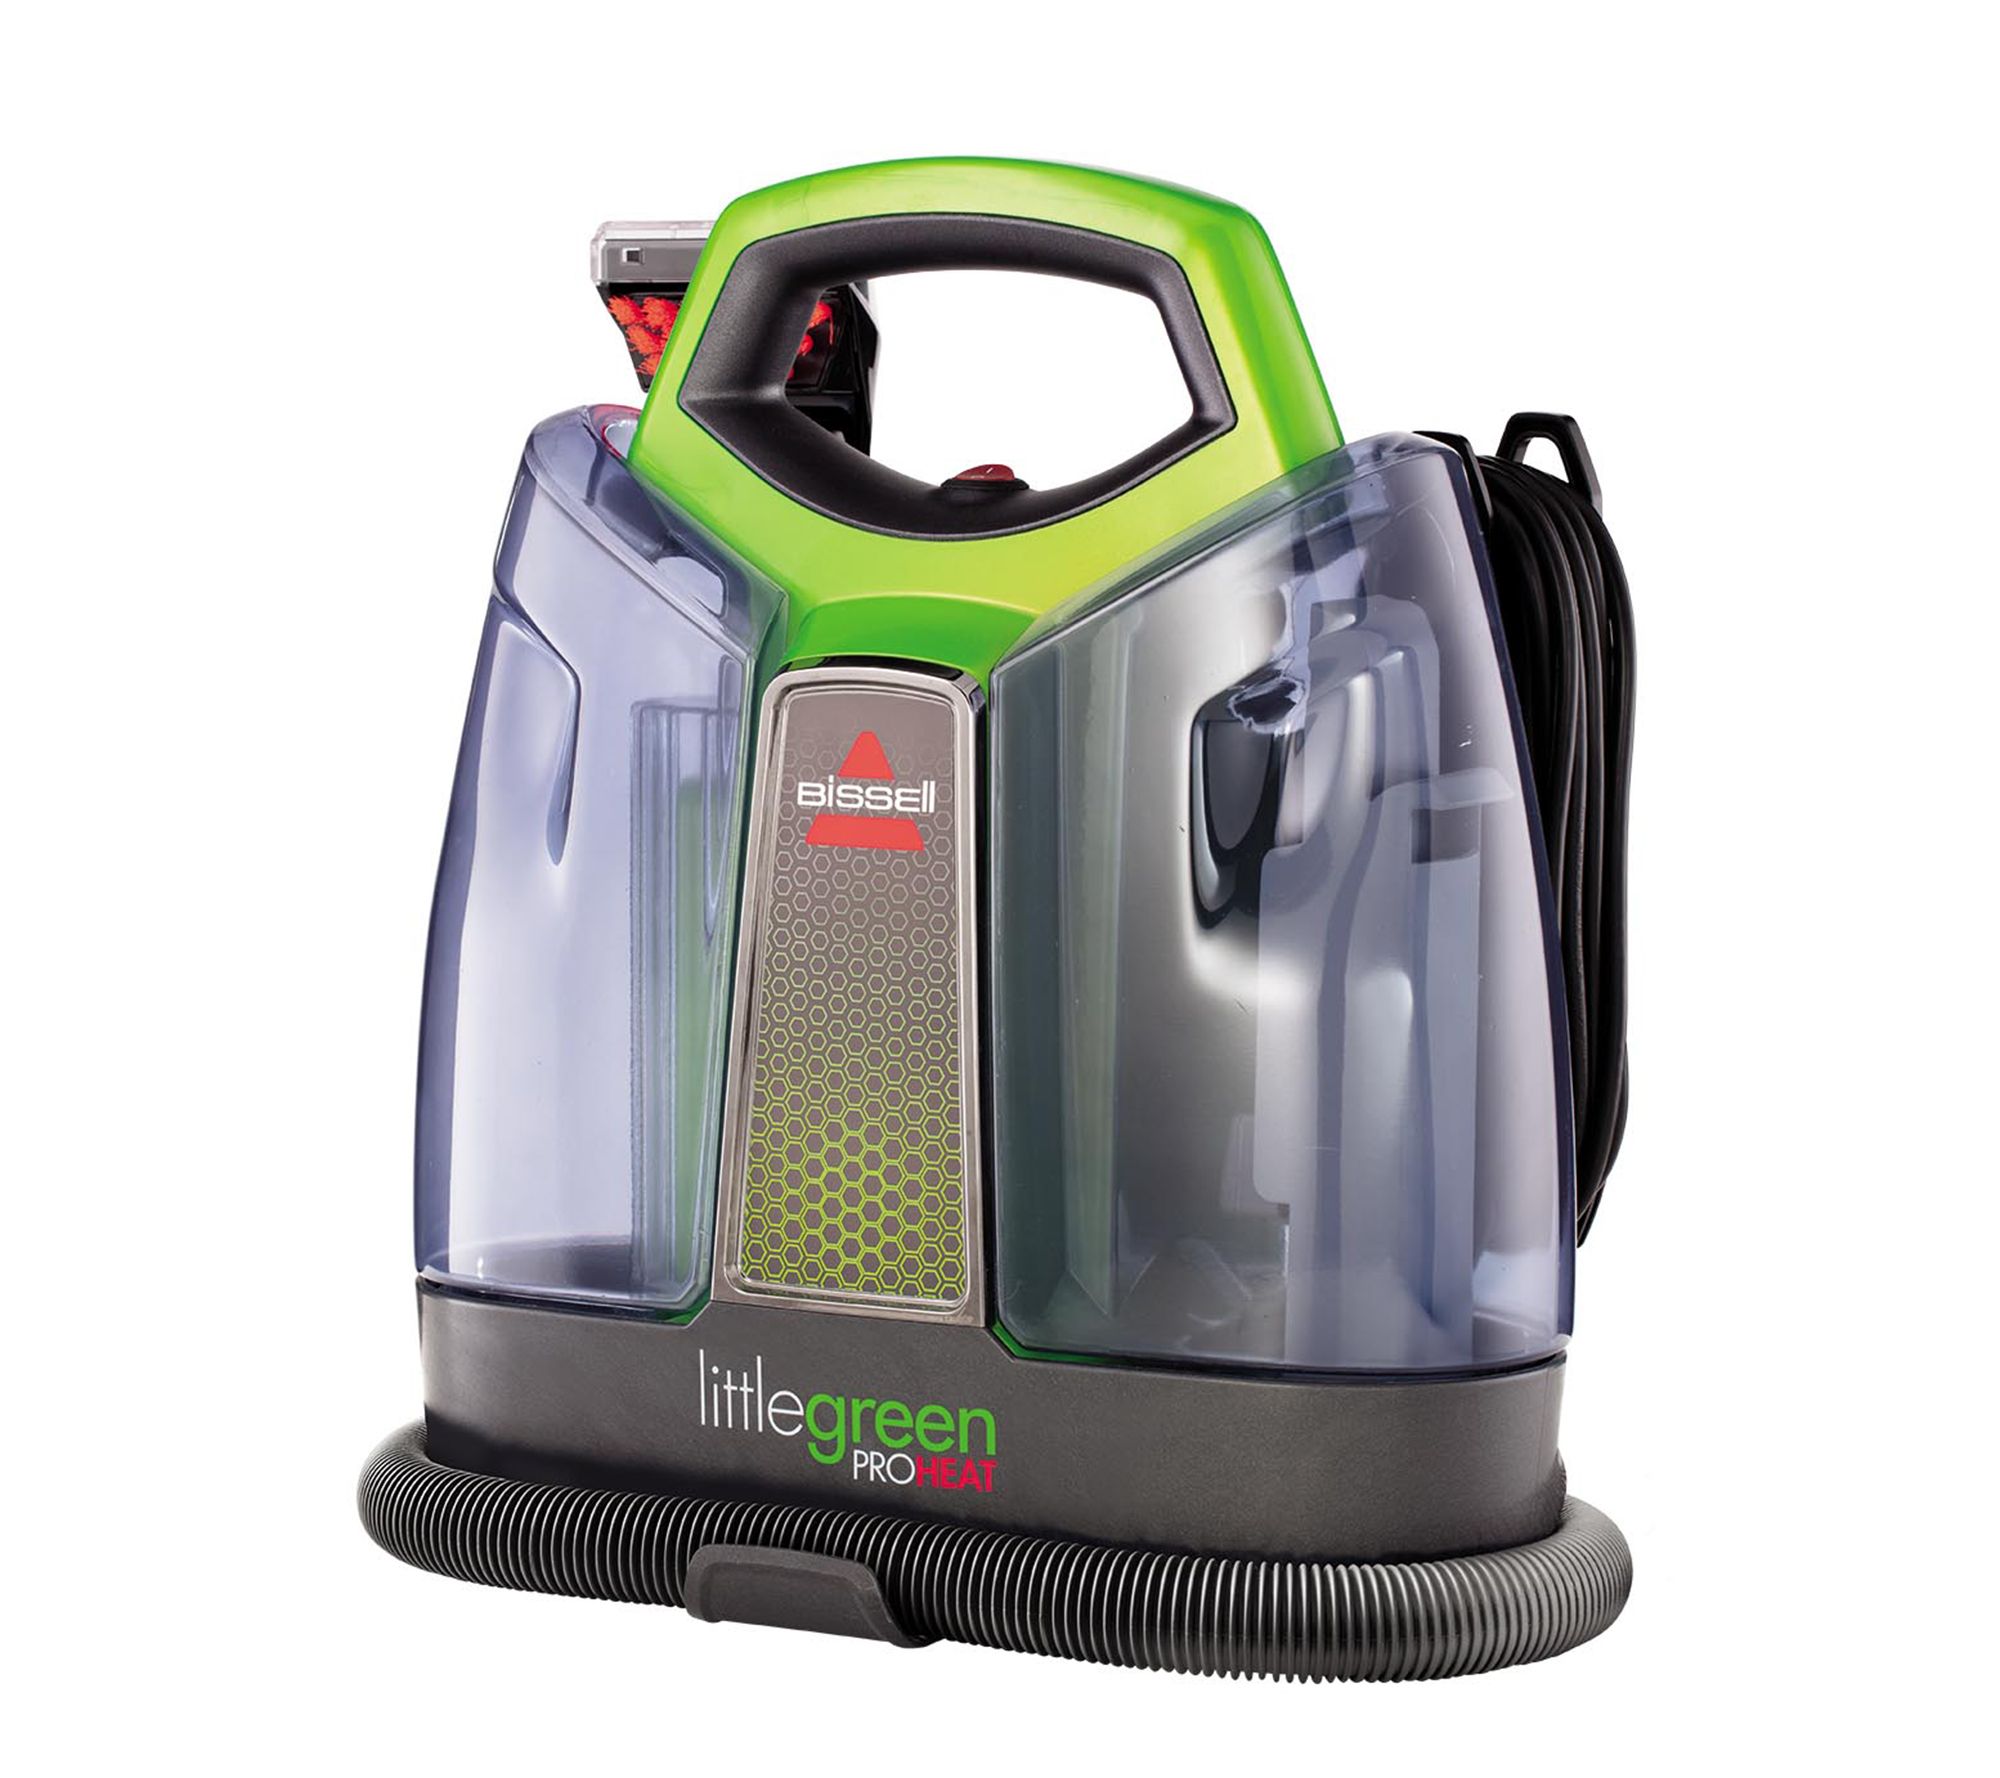 The Bissell Little Green Machine Is on Sale at